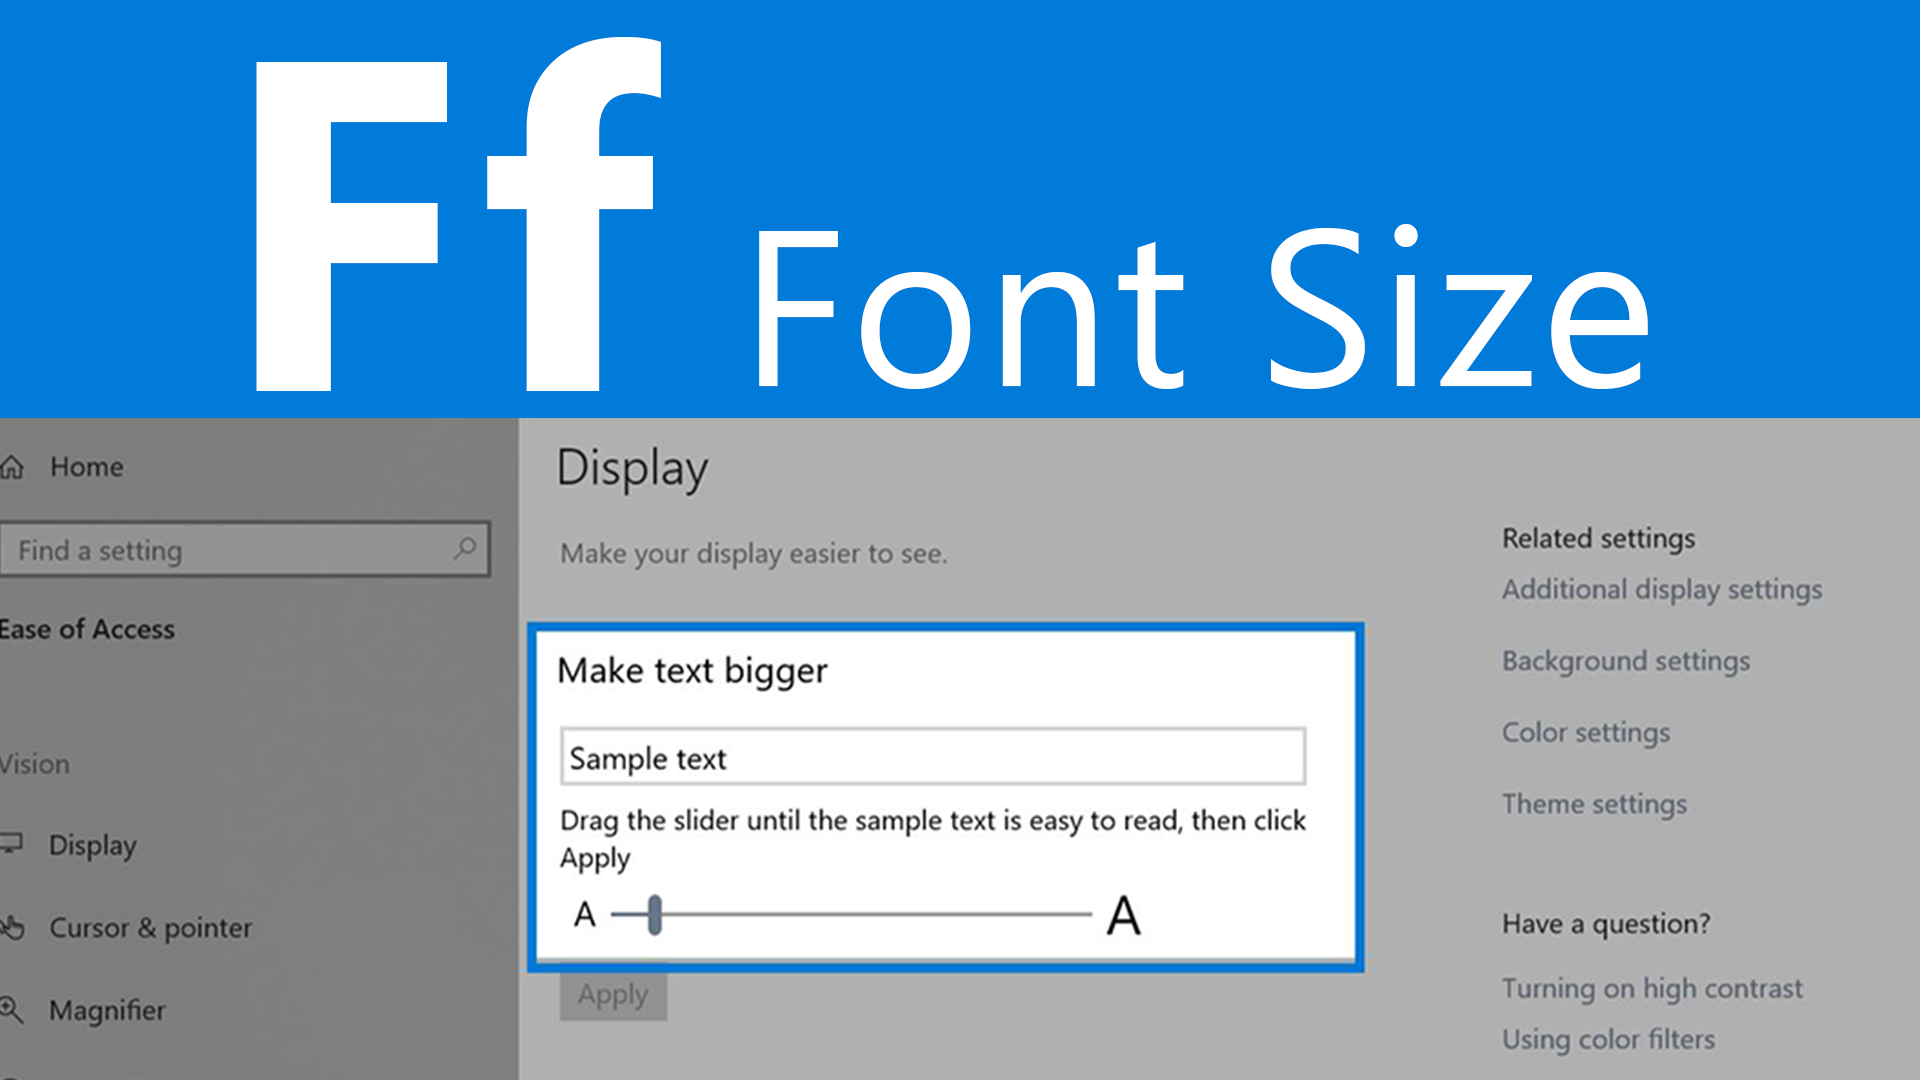 F is for font size. Screen showing how to make your font size bigger in settings,